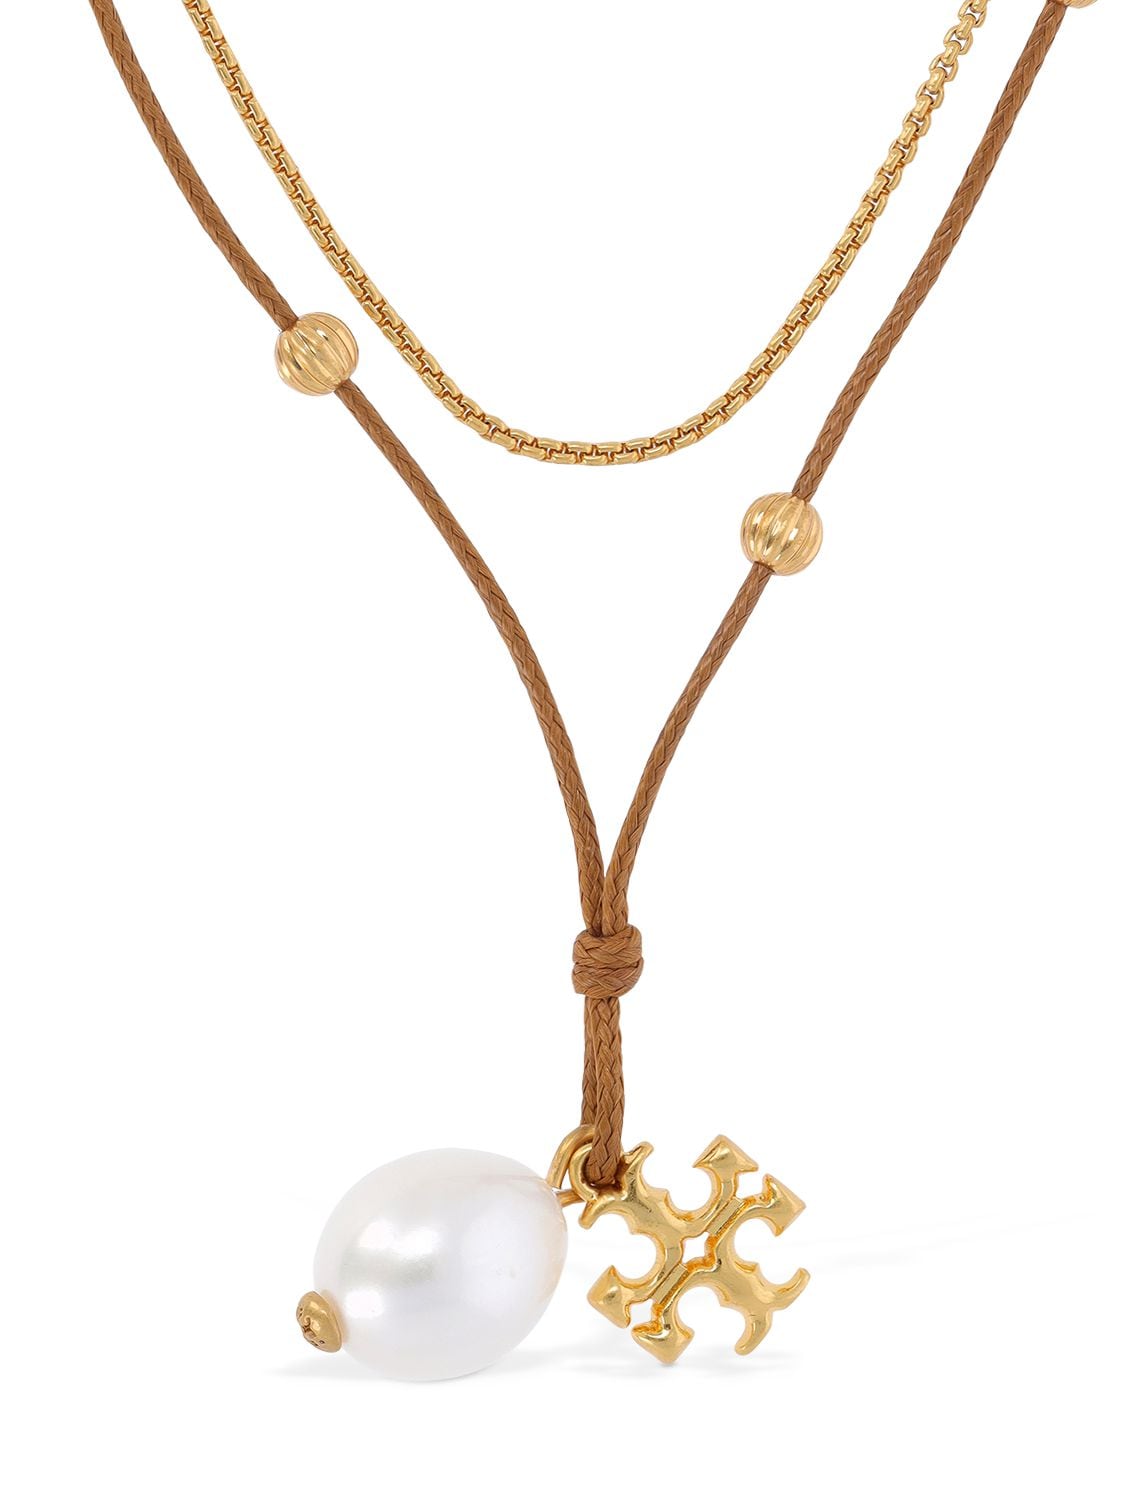 Image of Kira Double Cord Chain Necklace W/ Pearl